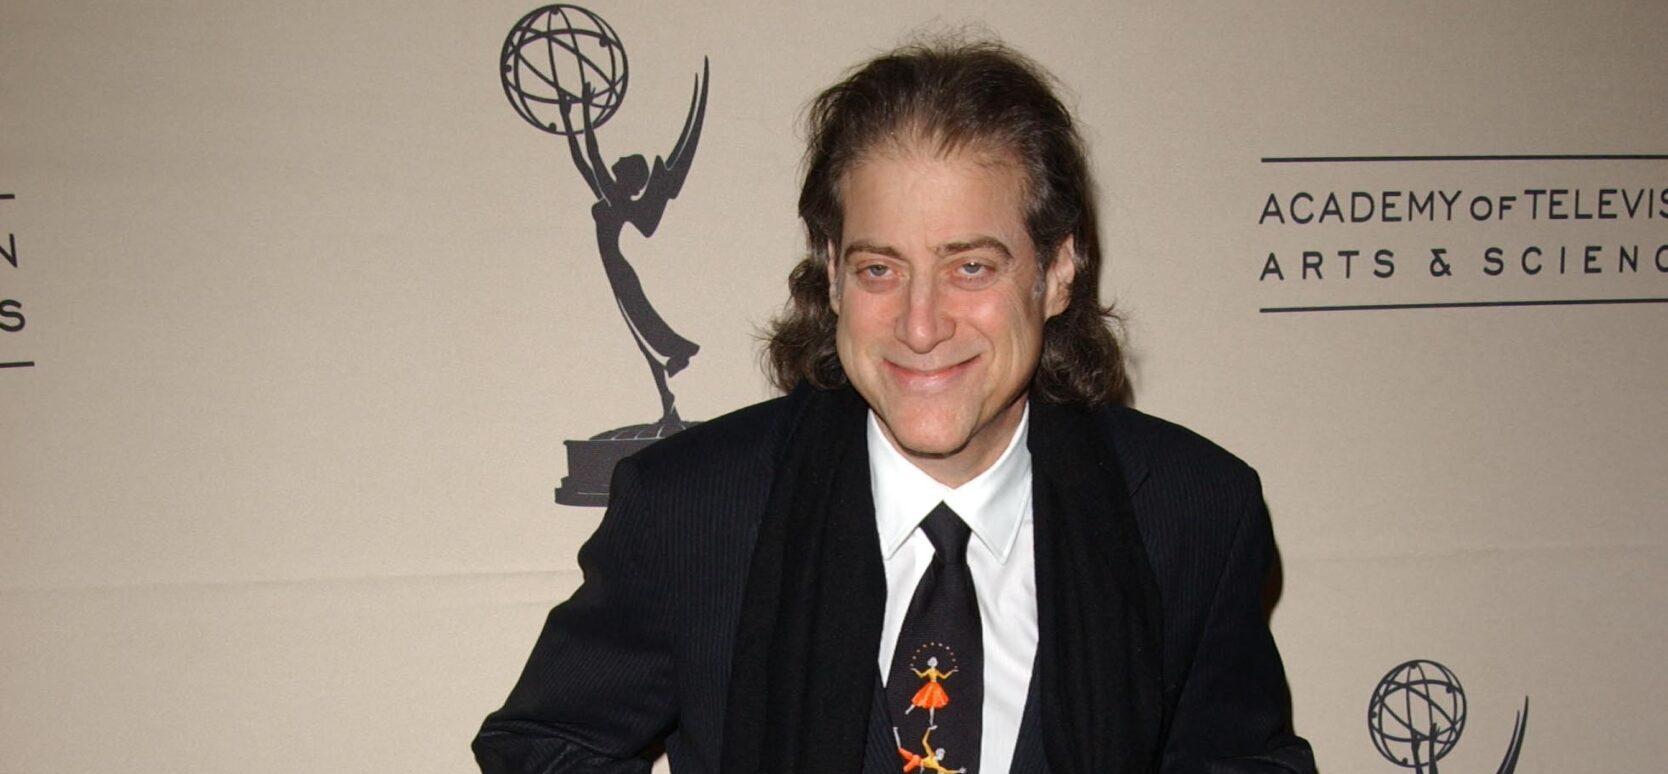 Richard Lewis at the Academy of Television Arts & Sciences Evening with "Curb Your Enthusiasm," Leonard H. Goldenson Theater, North Hollywood, CA 11-09-05